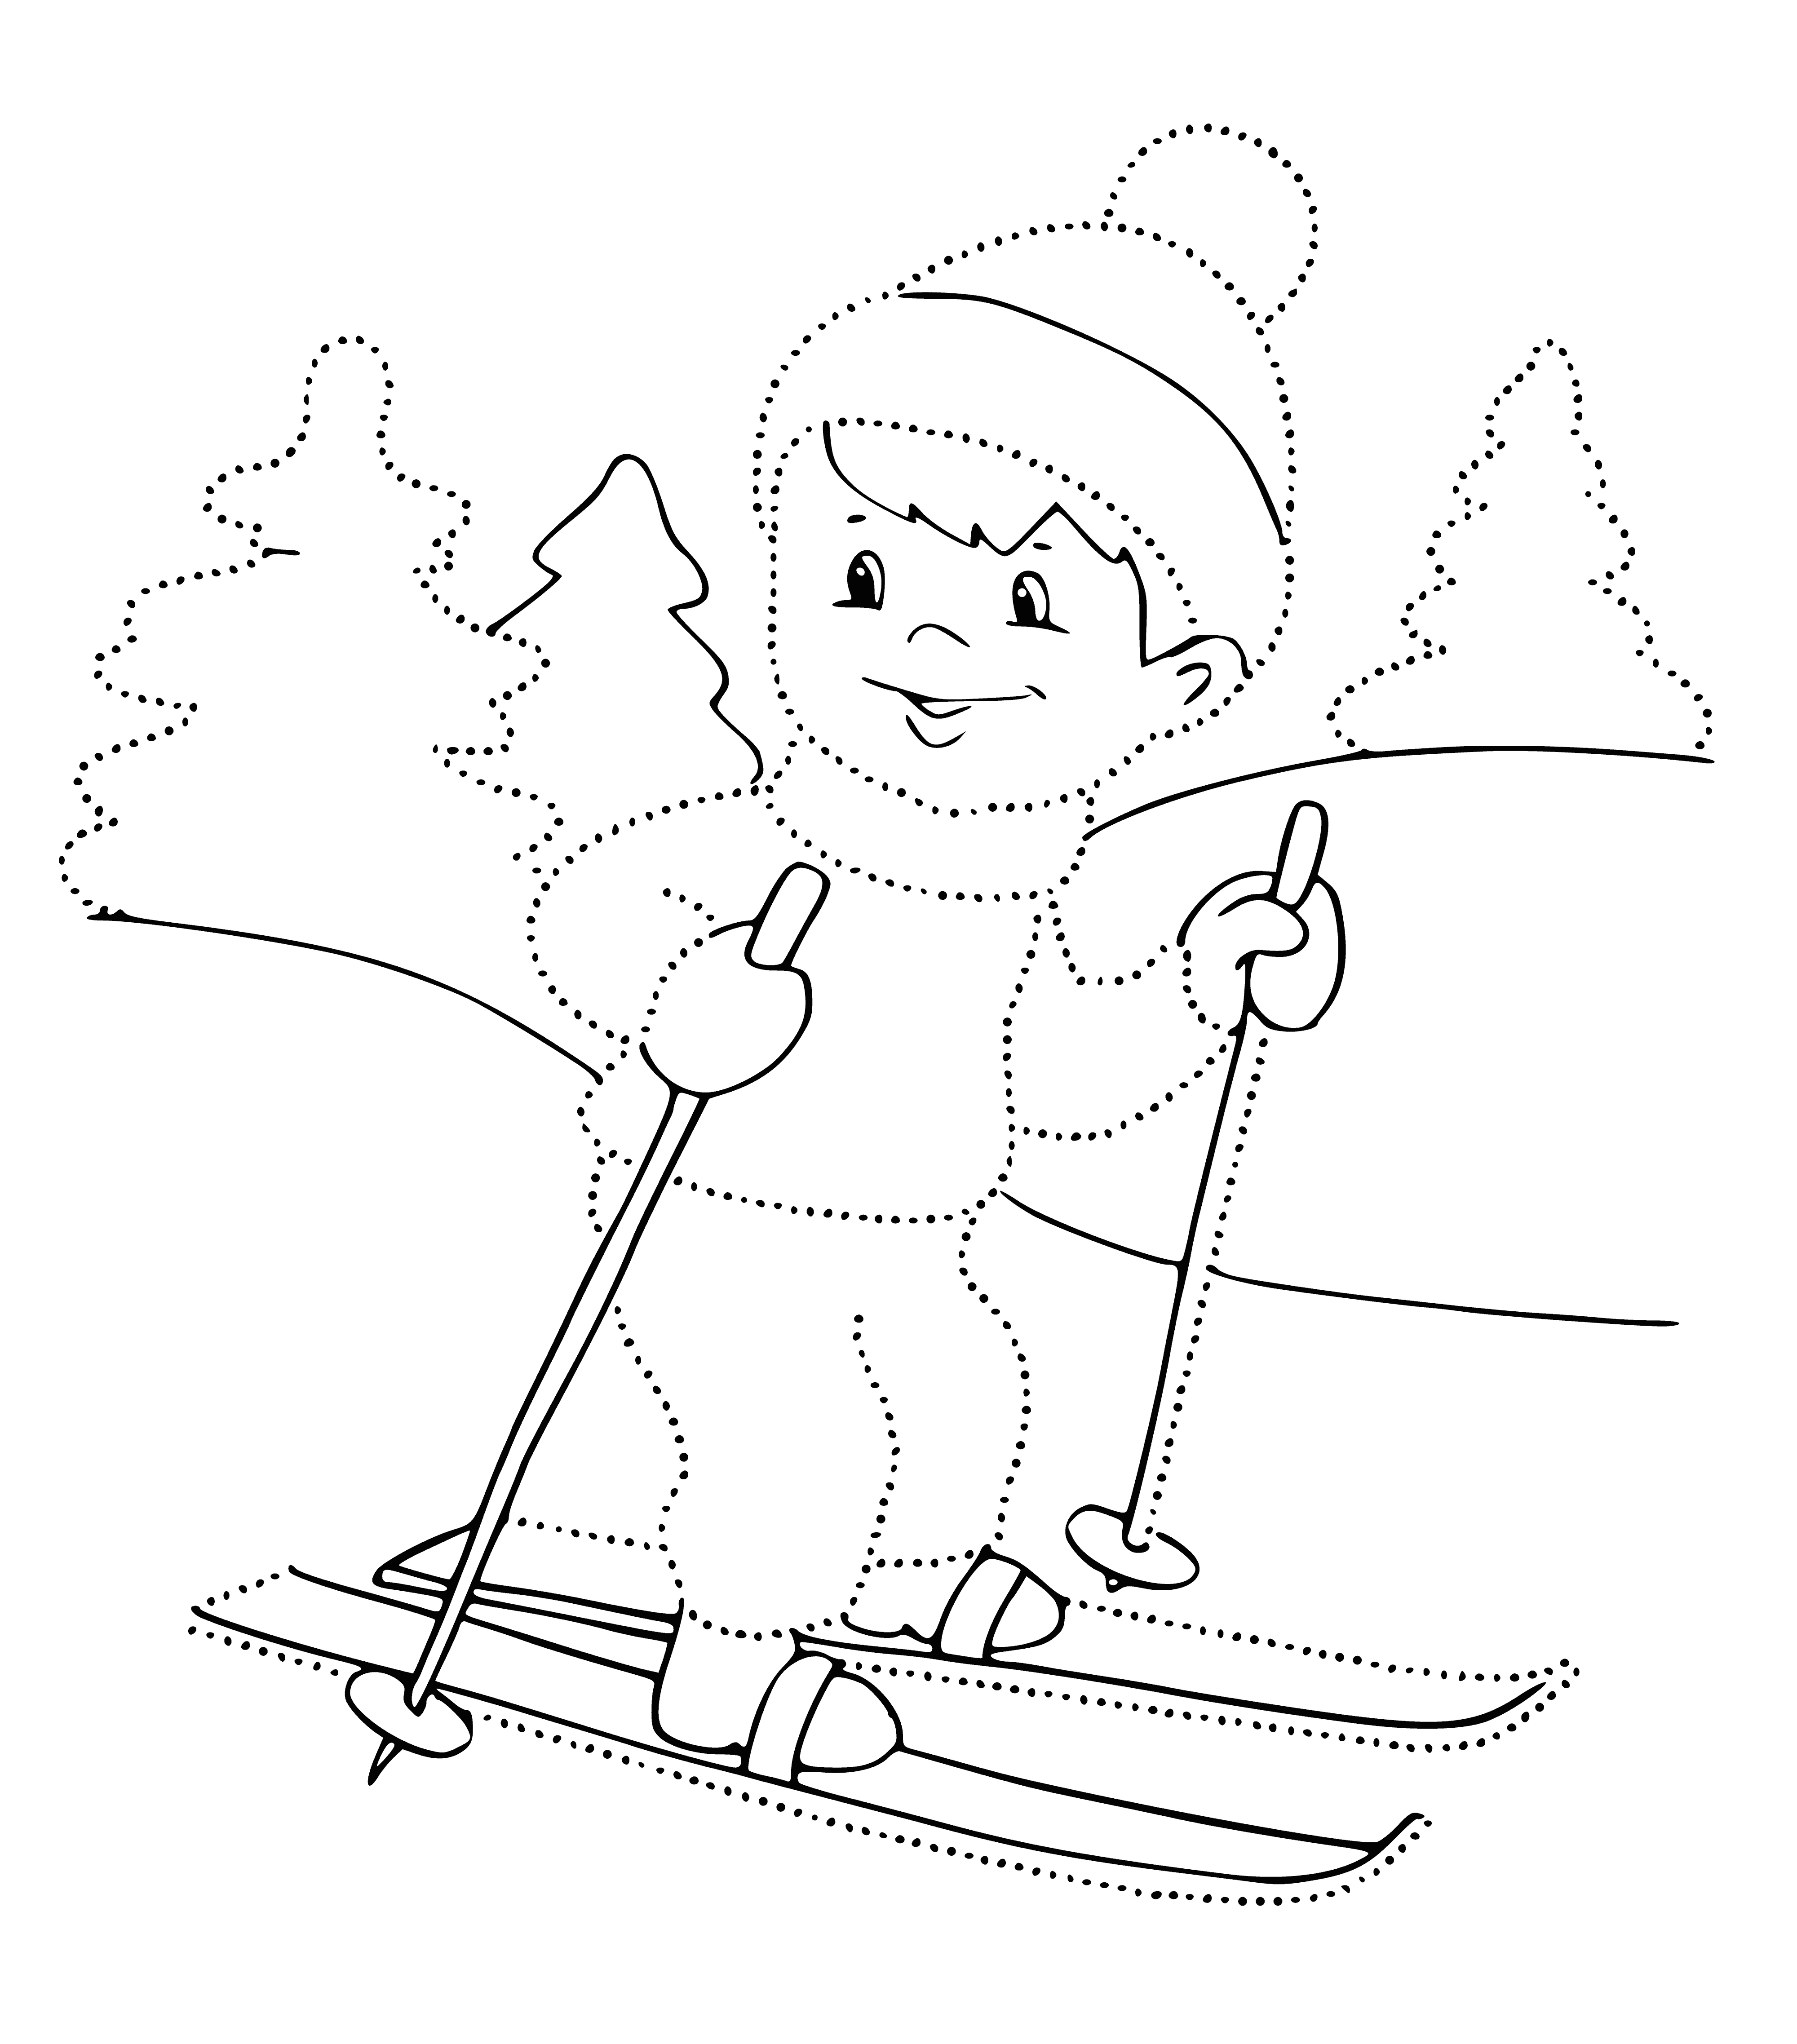 coloring page: Boy skiing down a hill in a snow-covered forest wearing a blue jacket, red pants & yellow scarf; trees also coated in snow. #winterwonderland